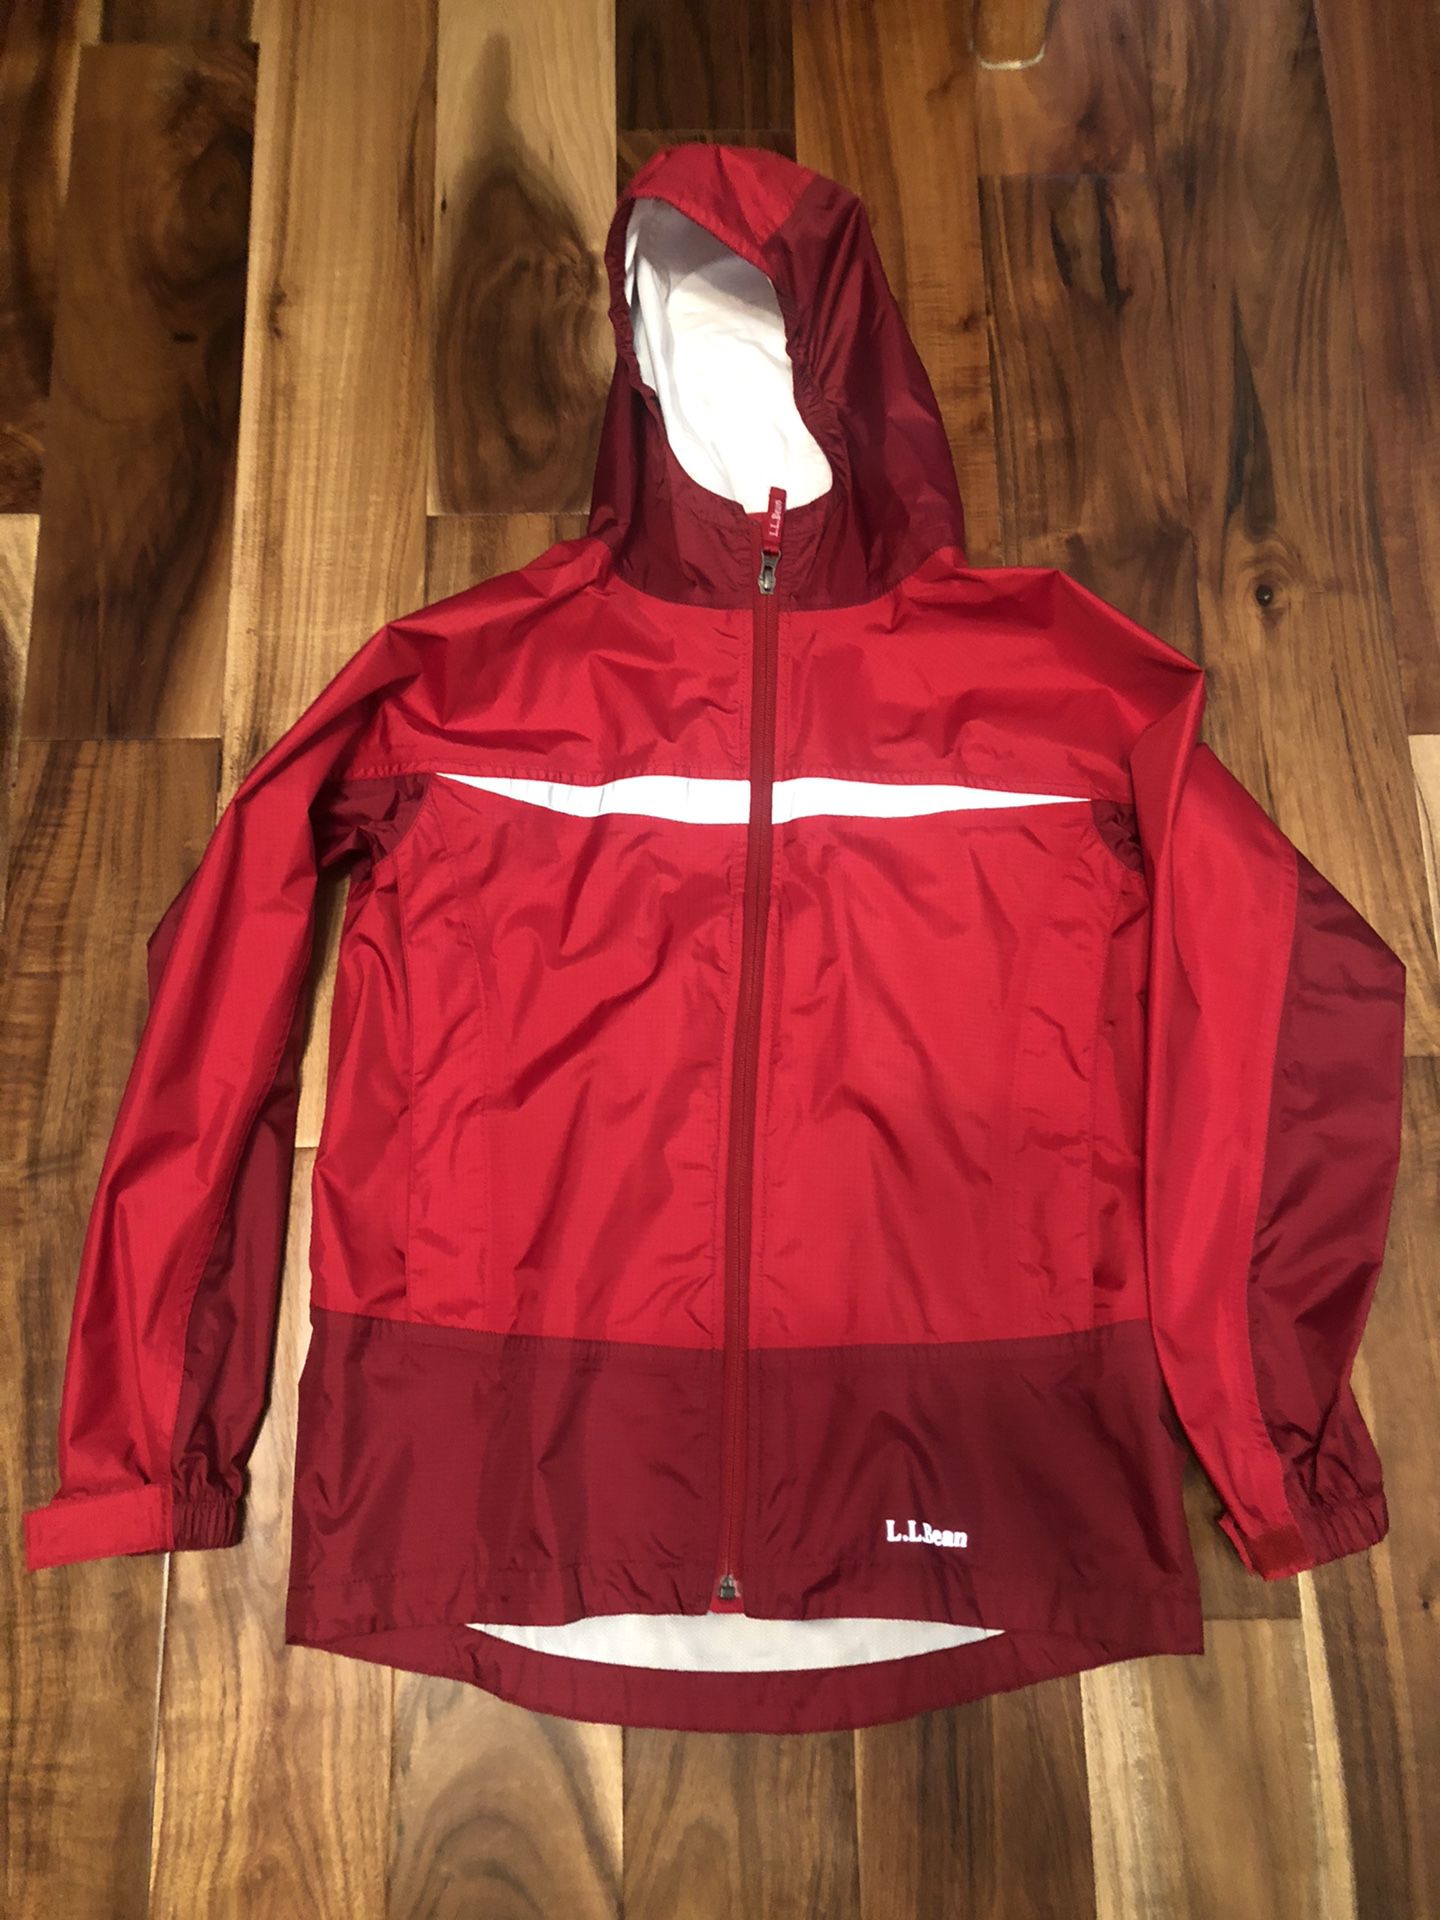 Rain jacket Llbean Size 14-16 youth  Excellent Condition 